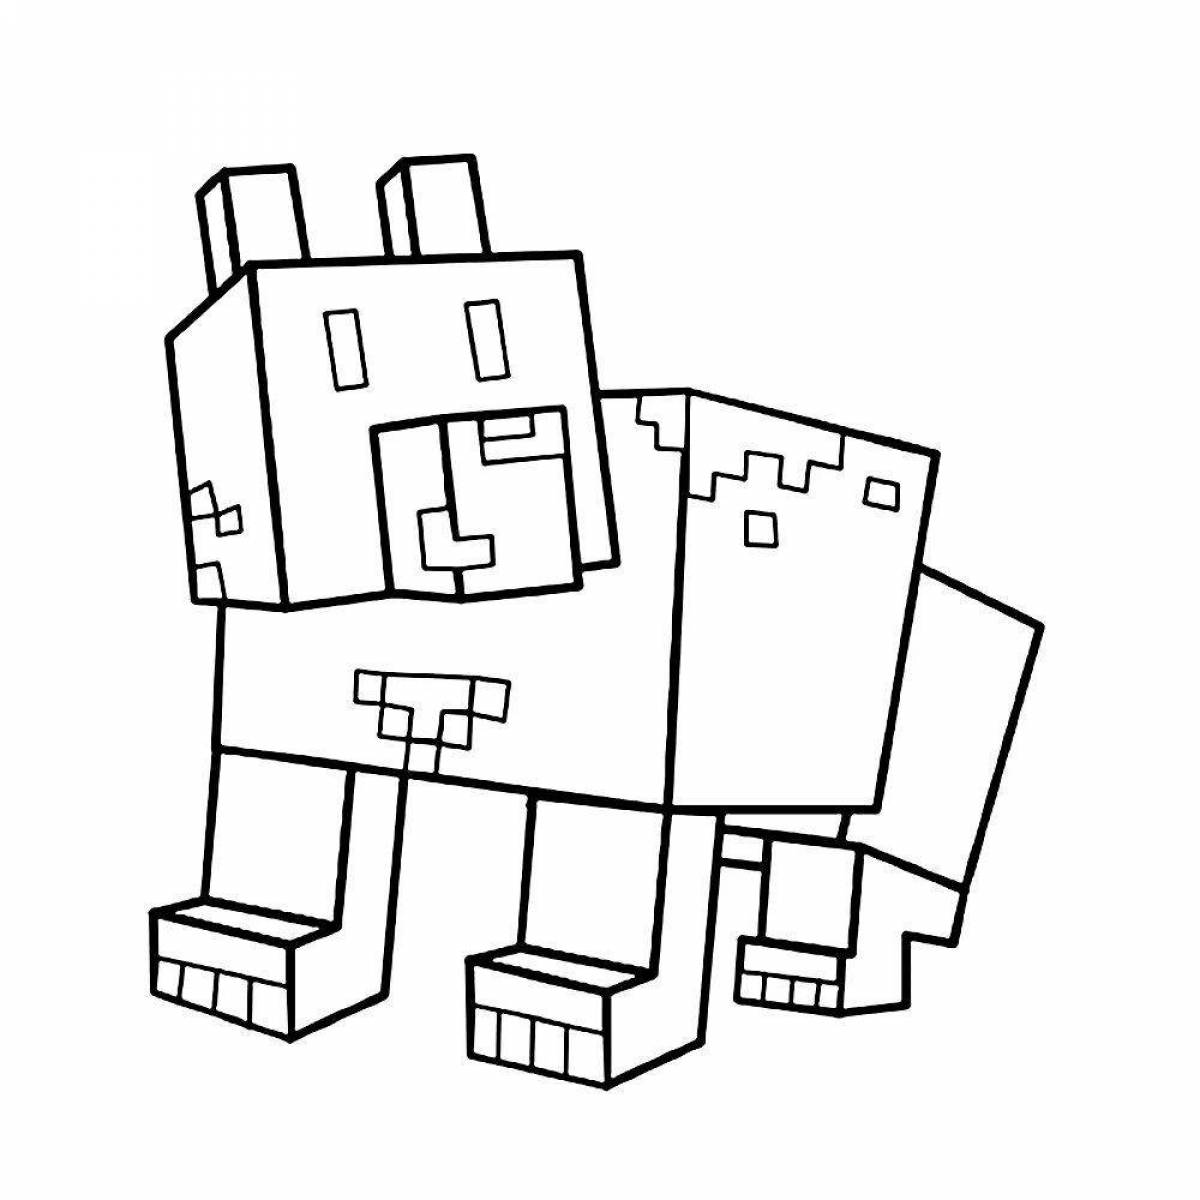 Fancy minecraft cow coloring page